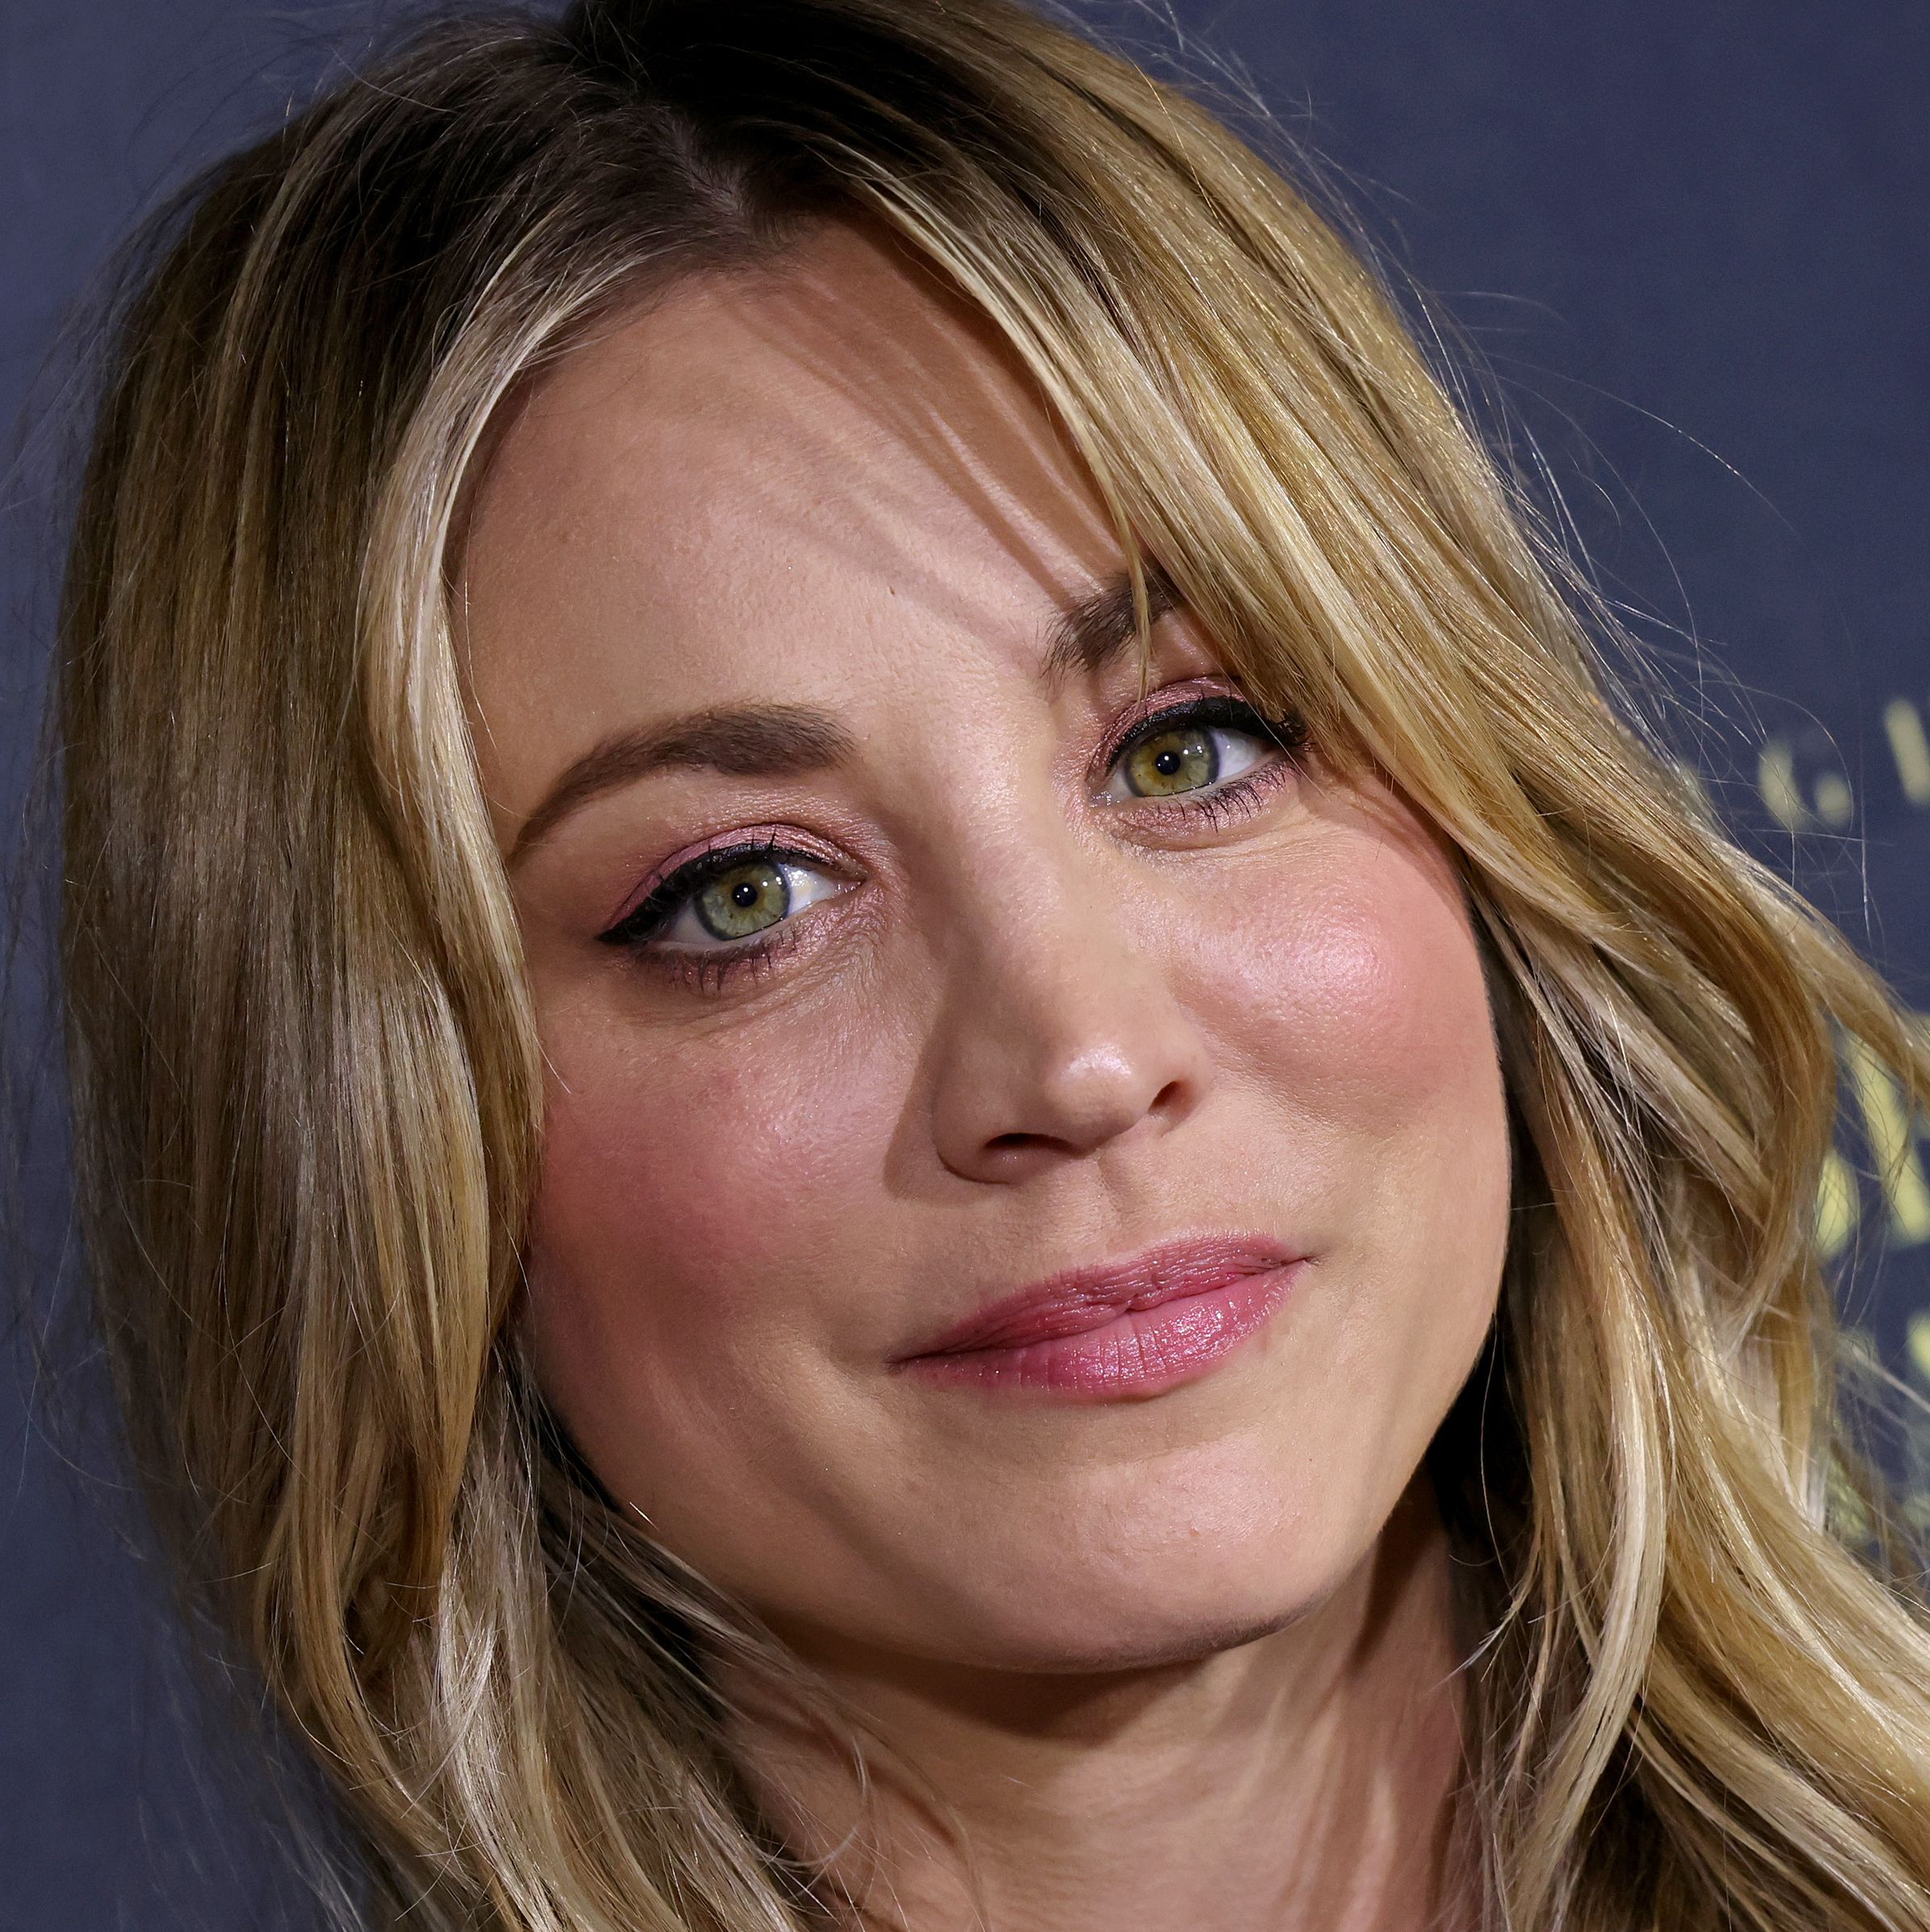 Celebrities Are Rushing to Support Kaley Cuoco After Seeing Her Heartbreaking IG